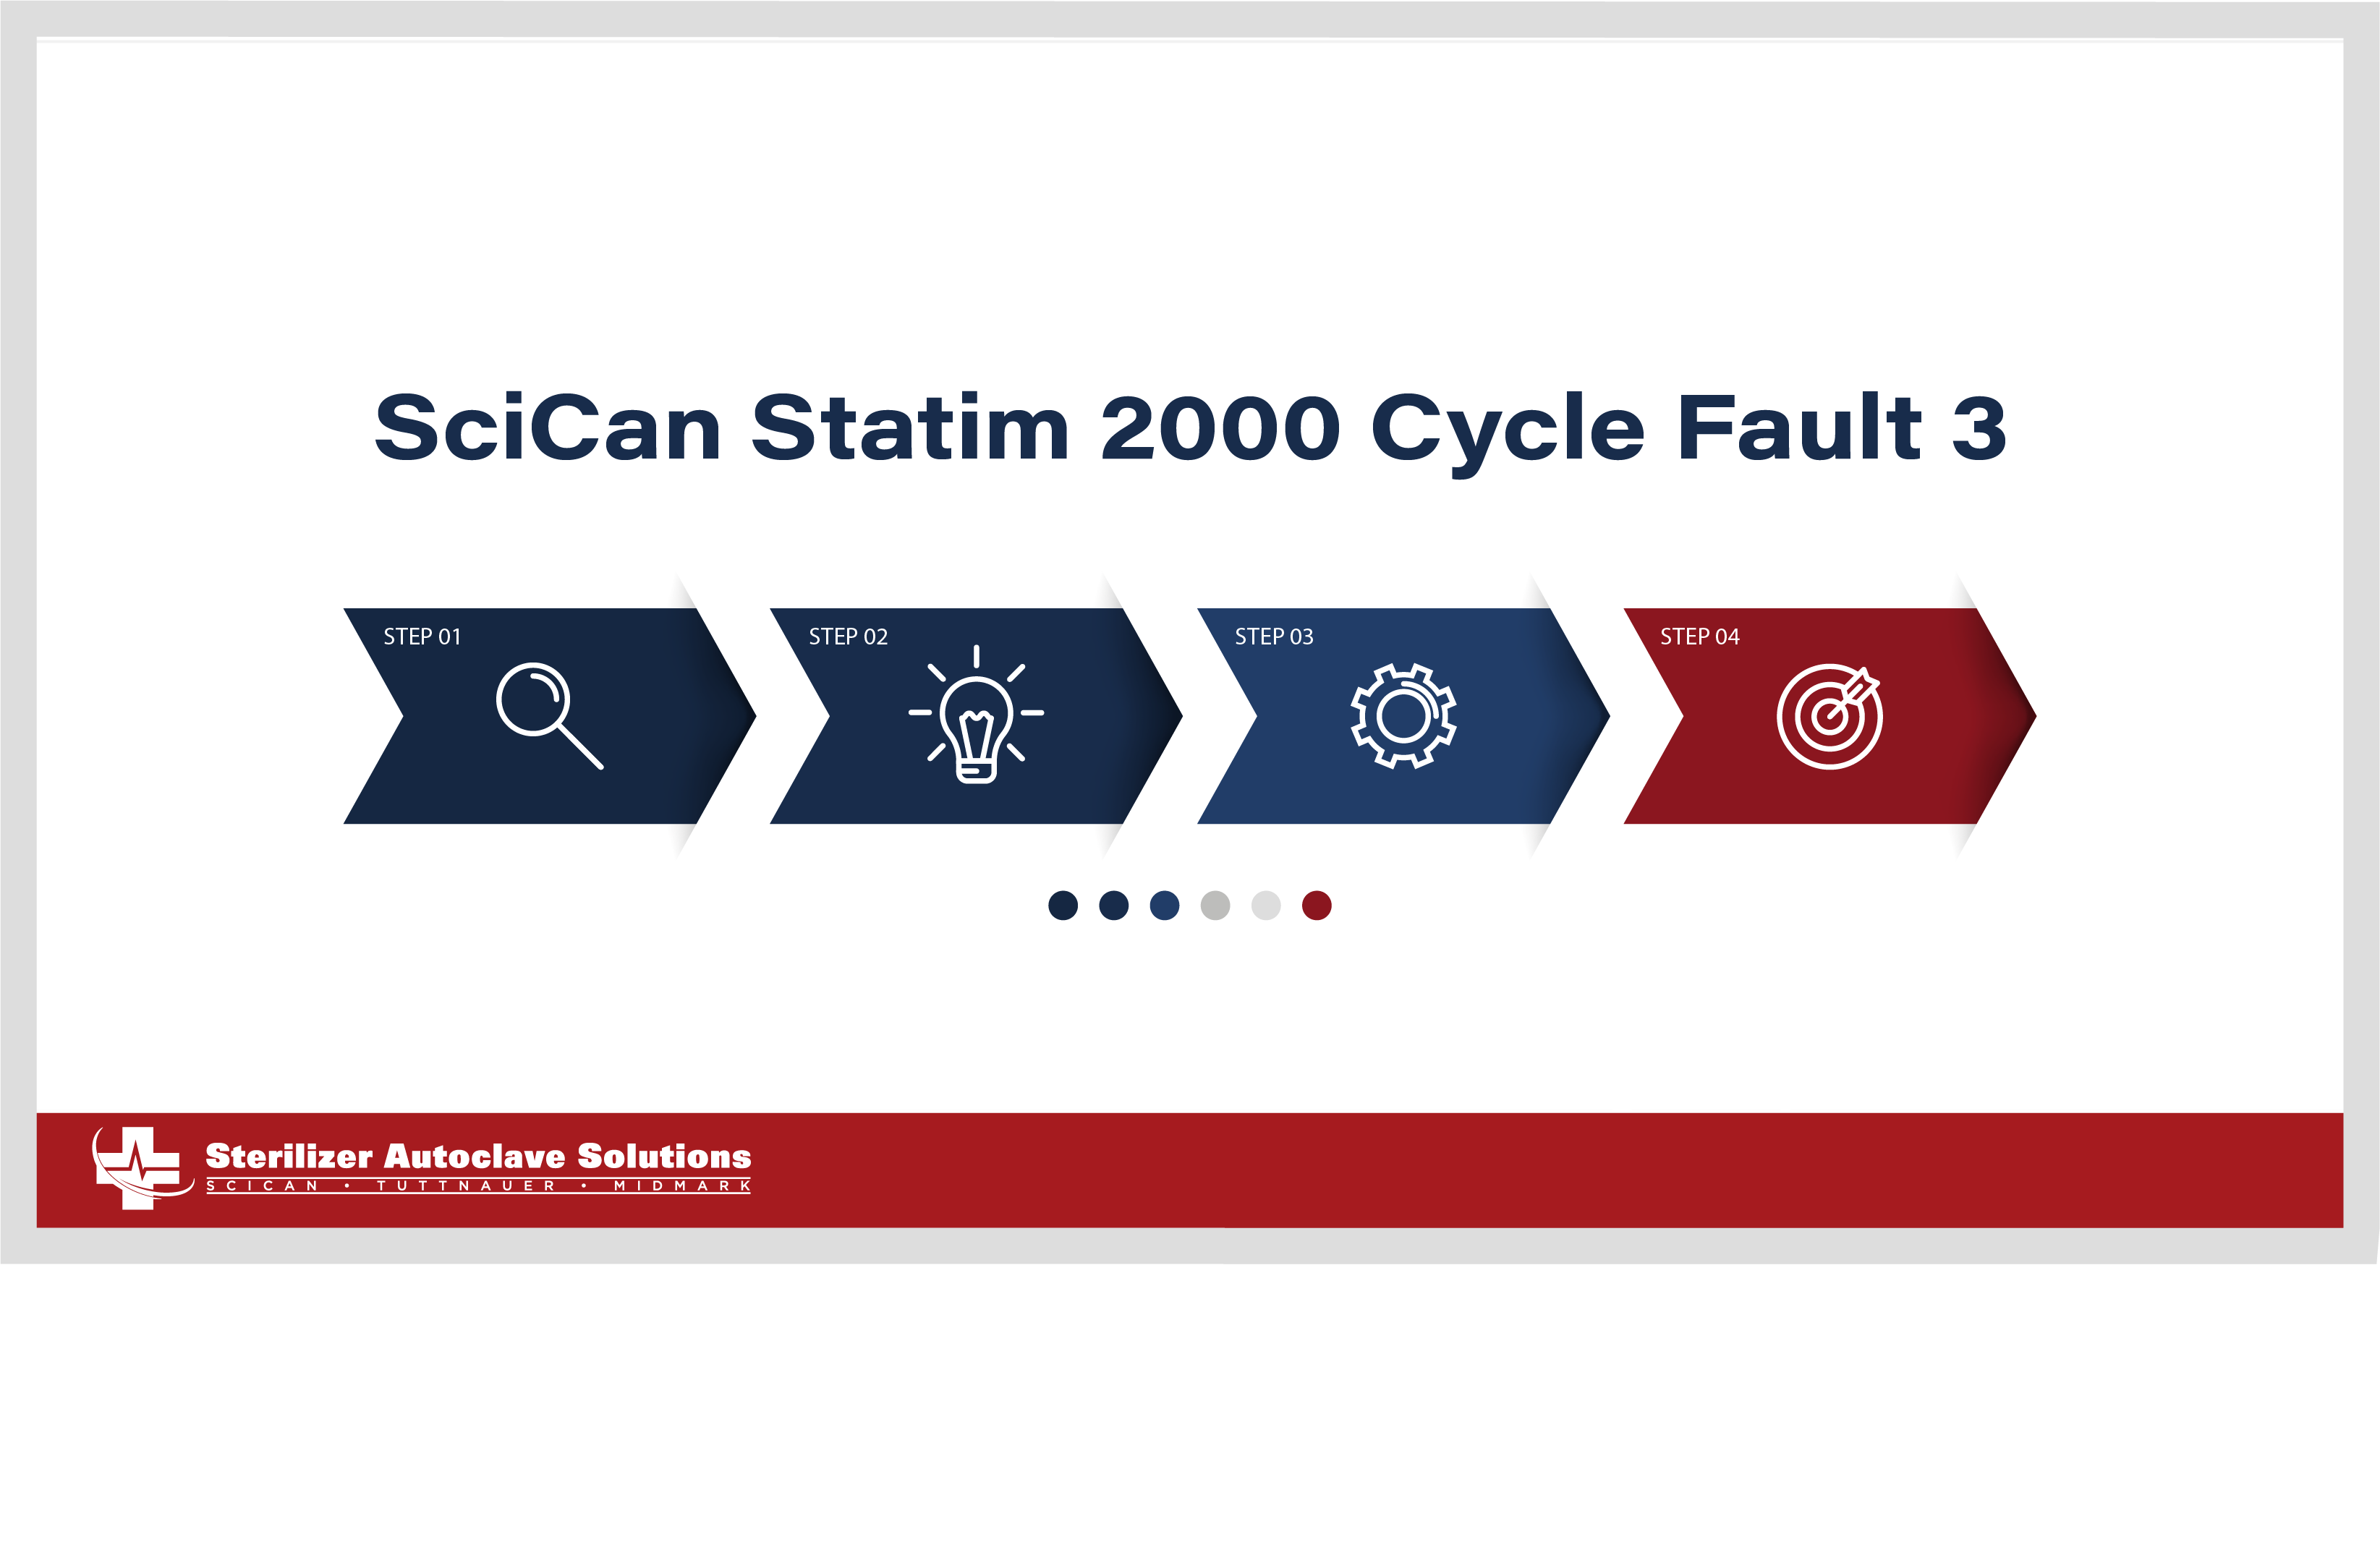 This is the article on the SciCan Statim 2000 Cycle Fault 3.